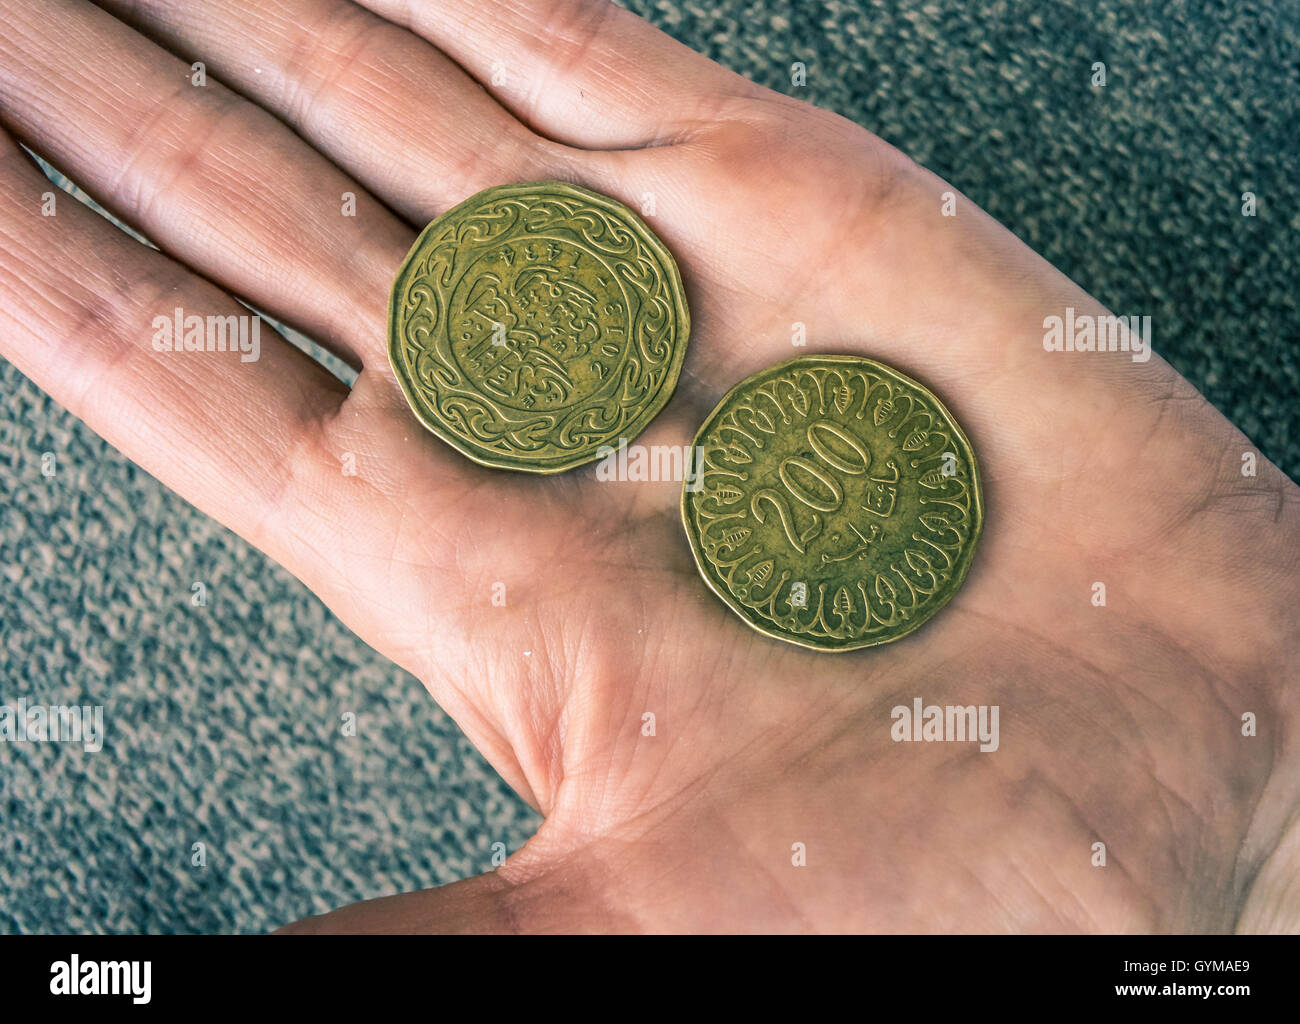 Two Tunisian coins on the woman's palm Stock Photo